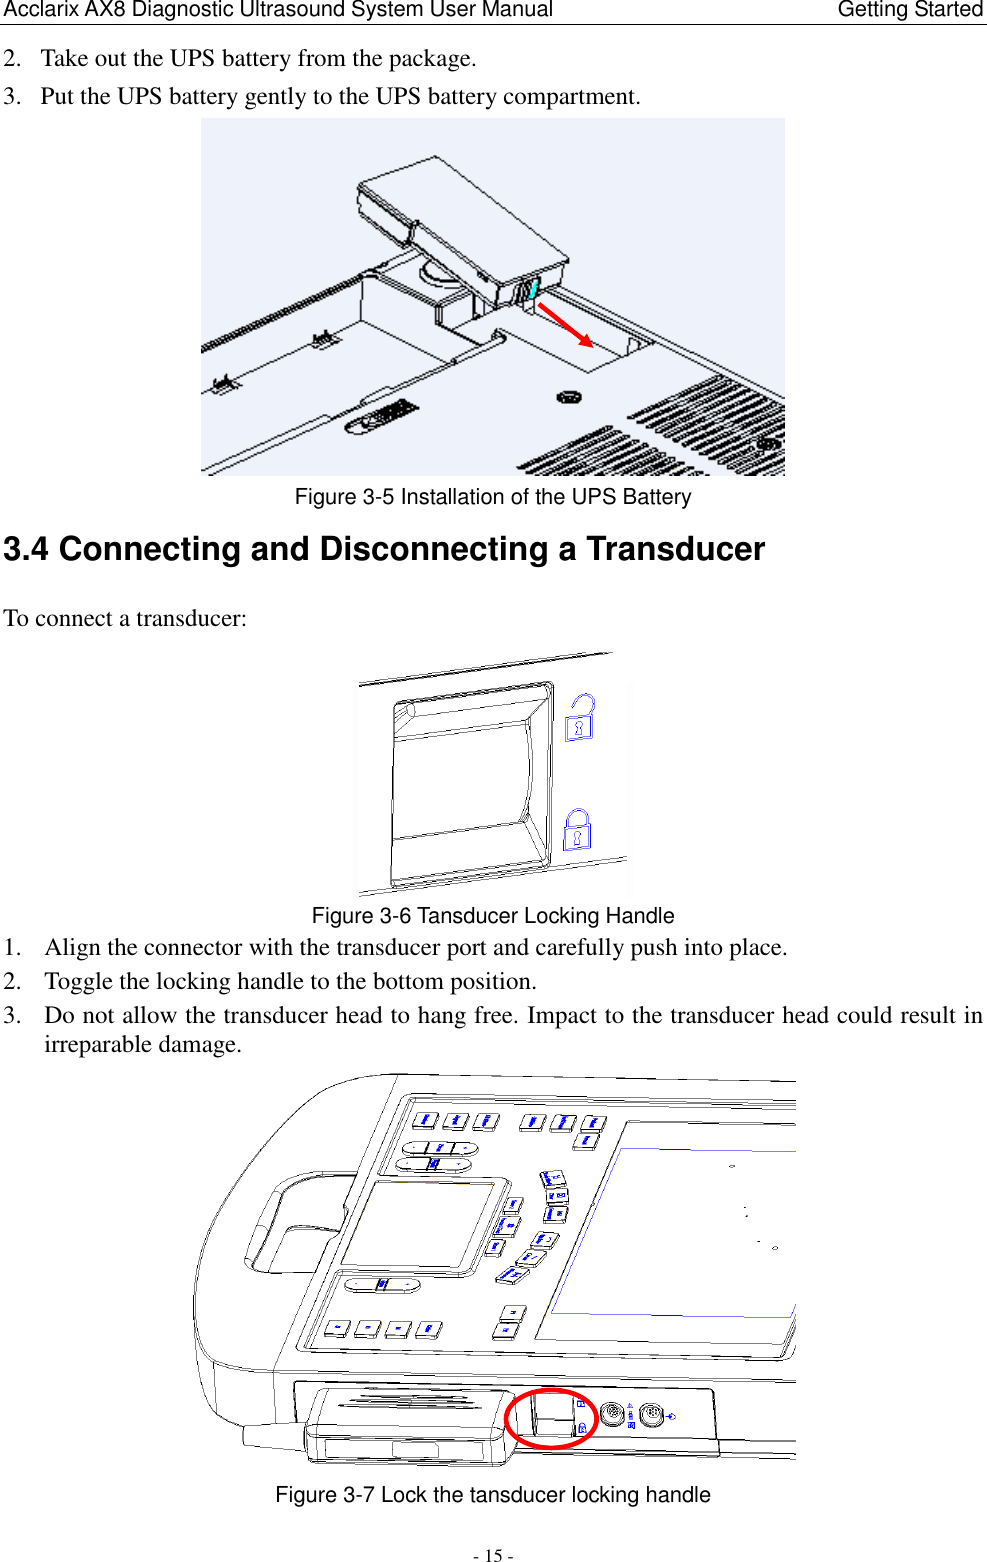 Acclarix AX8 Diagnostic Ultrasound System User Manual                                                Getting Started - 15 - 2. Take out the UPS battery from the package. 3. Put the UPS battery gently to the UPS battery compartment.  Figure 3-5 Installation of the UPS Battery 3.4 Connecting and Disconnecting a Transducer To connect a transducer:    Figure 3-6 Tansducer Locking Handle 1. Align the connector with the transducer port and carefully push into place. 2. Toggle the locking handle to the bottom position. 3. Do not allow the transducer head to hang free. Impact to the transducer head could result in irreparable damage.  Figure 3-7 Lock the tansducer locking handle 